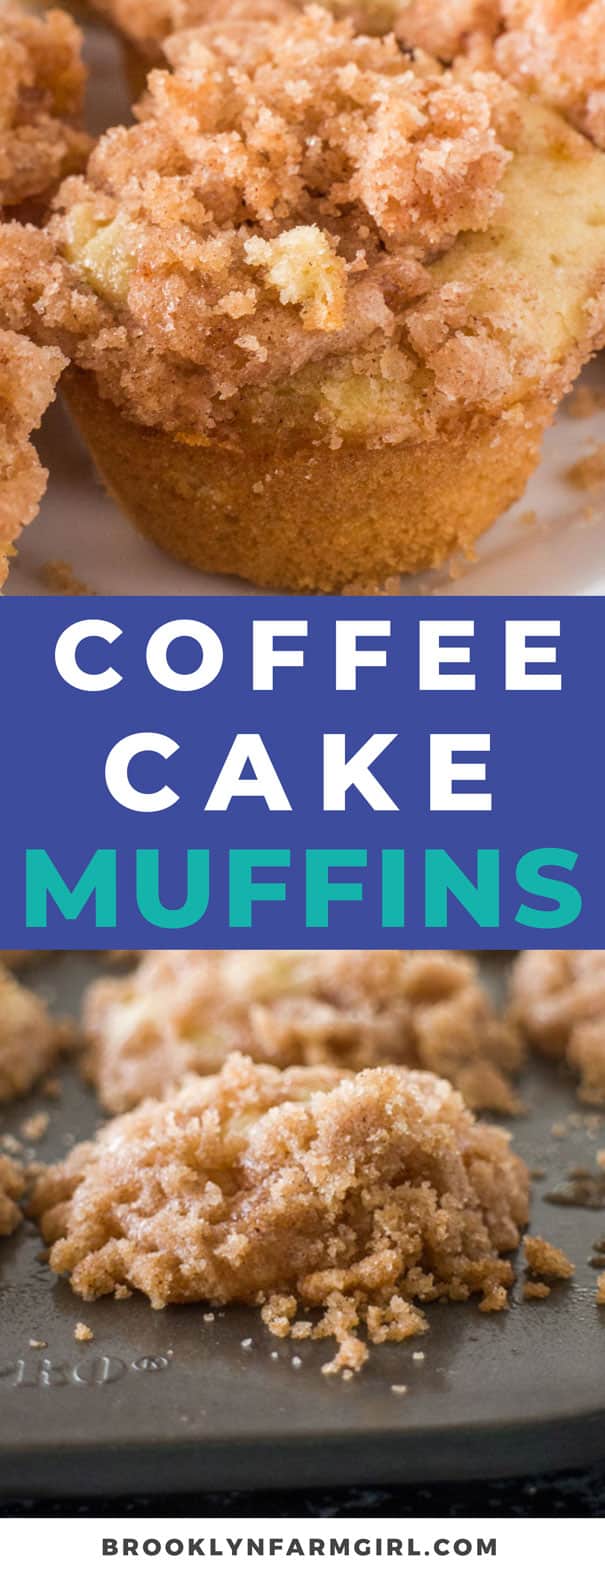 Easy Mini Coffee Cake Muffins recipe with a cinnamon sugar streusel on top! These fluffy moist muffins are so quick to make!  Recipe makes 16 mini muffins, only 105 calories a piece.